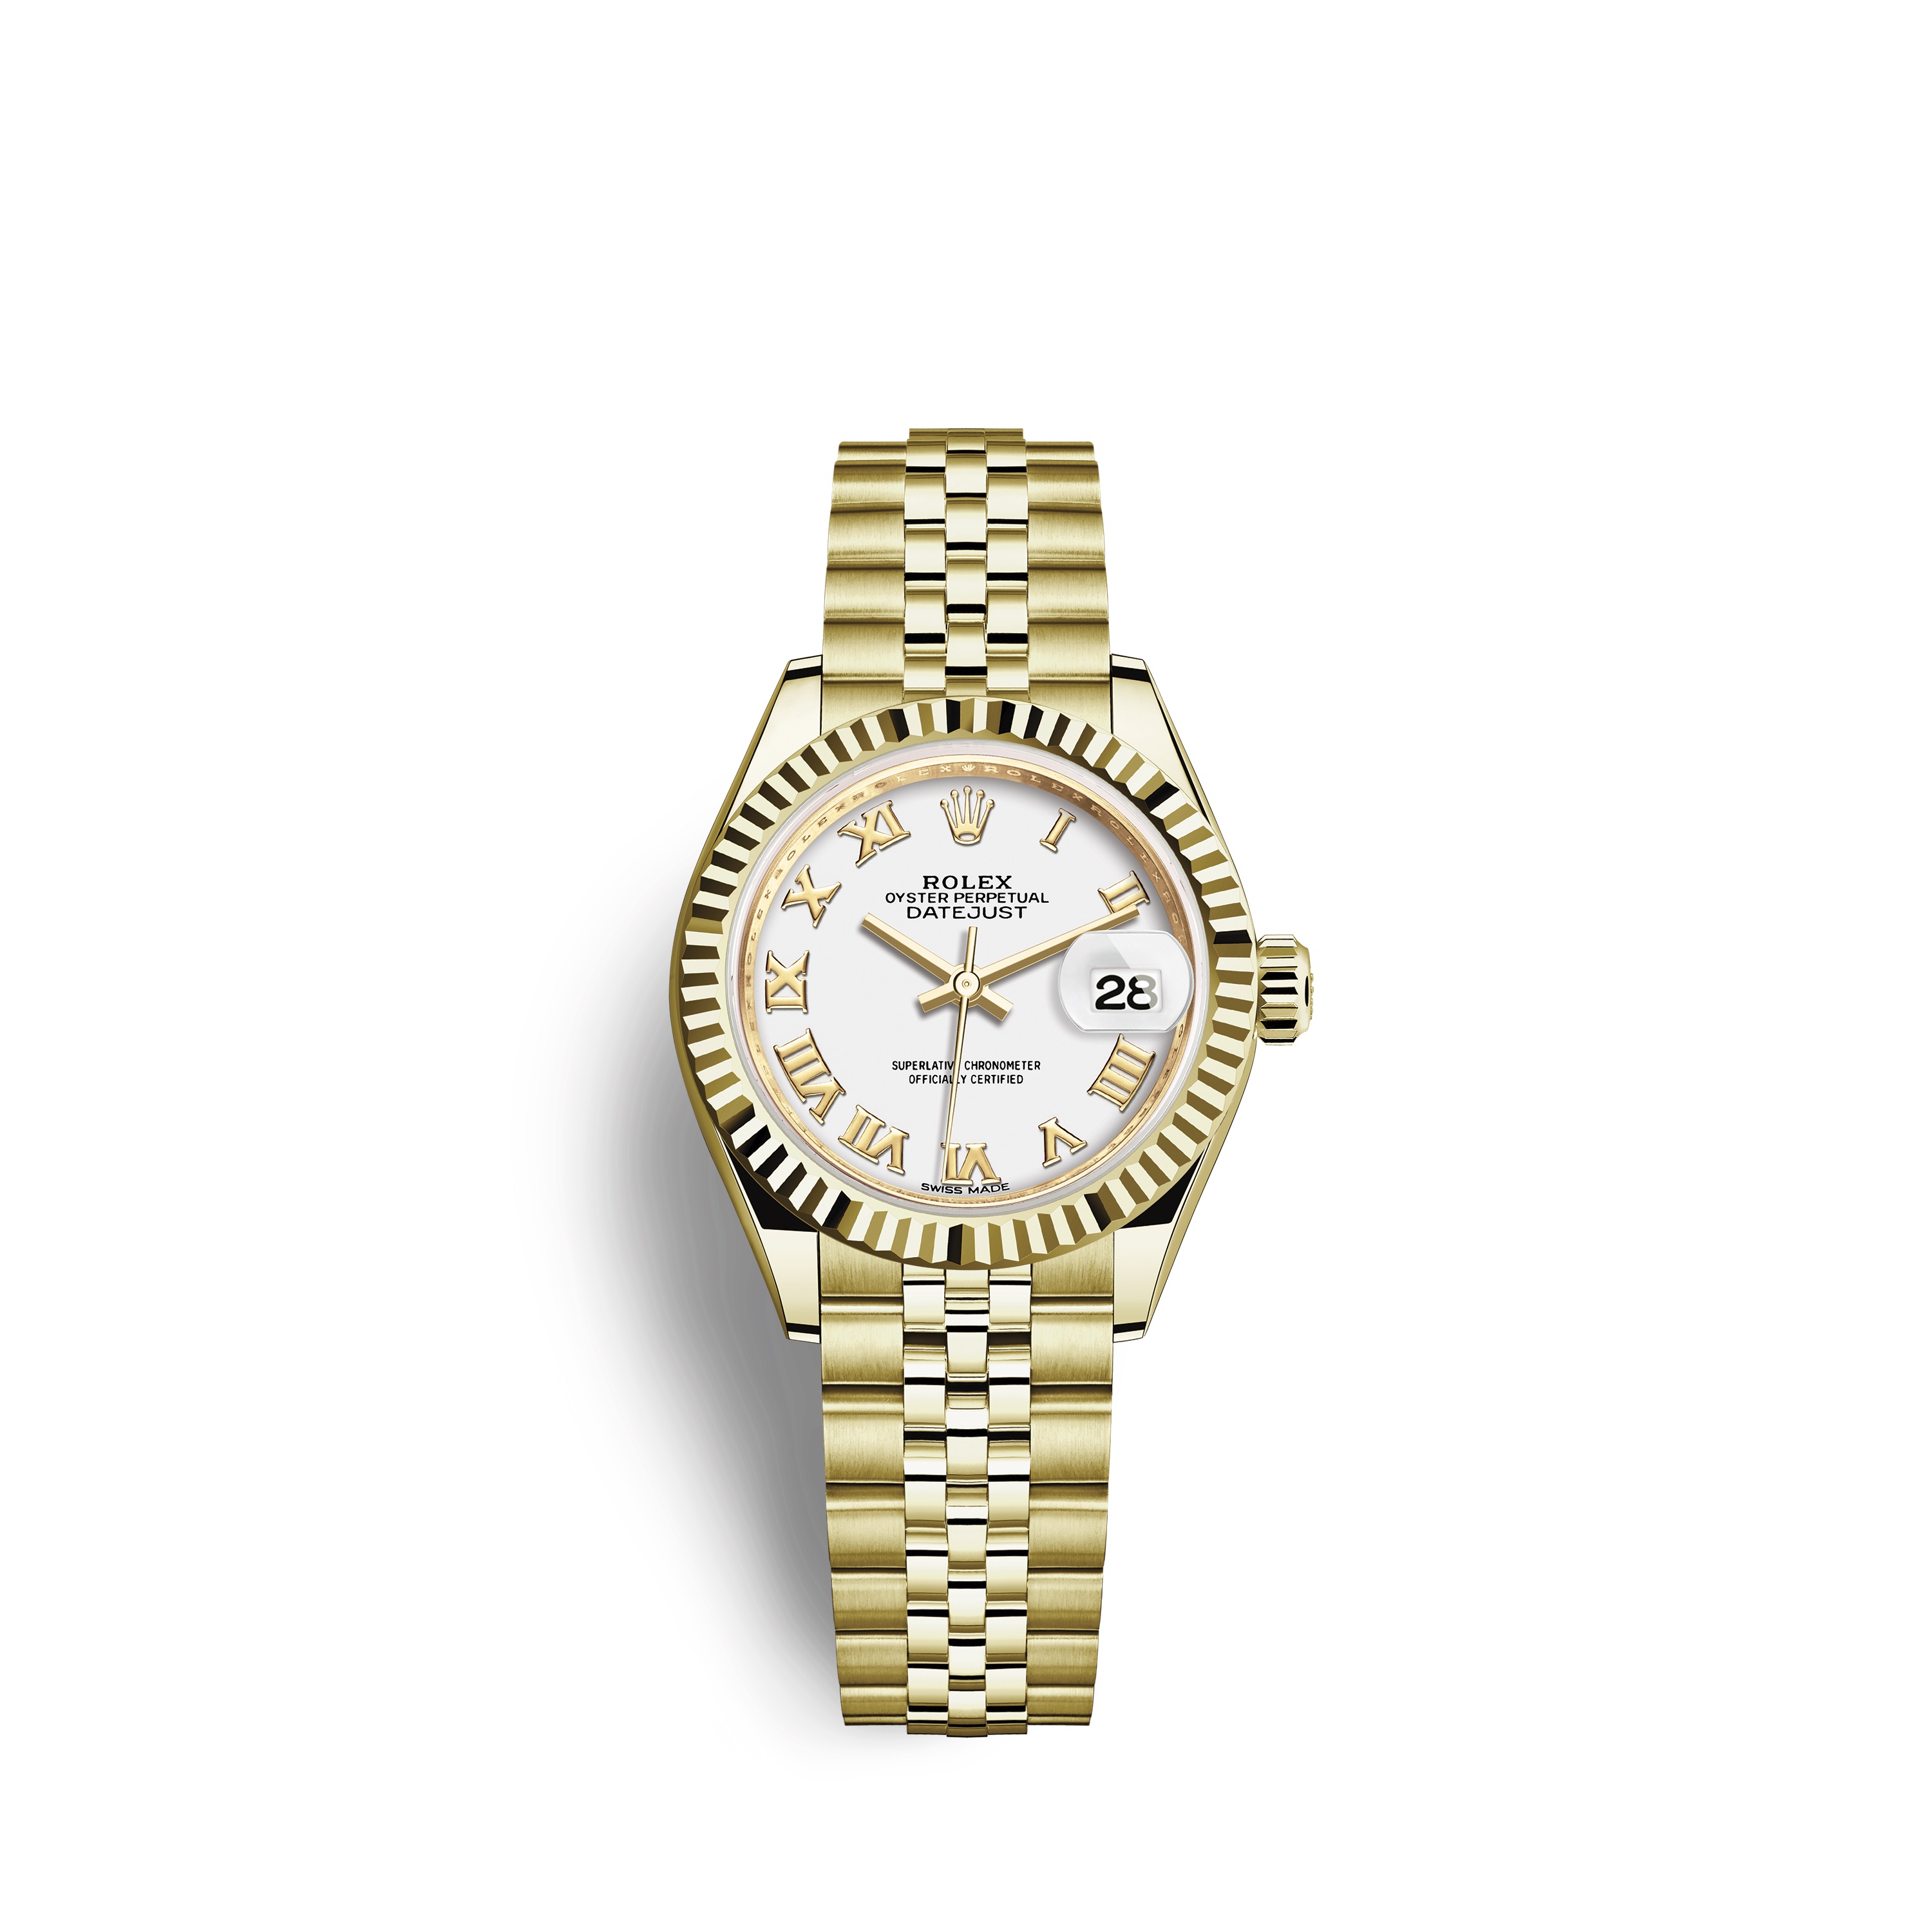 Lady-Datejust 28 279178 Gold Watch (White) - Click Image to Close